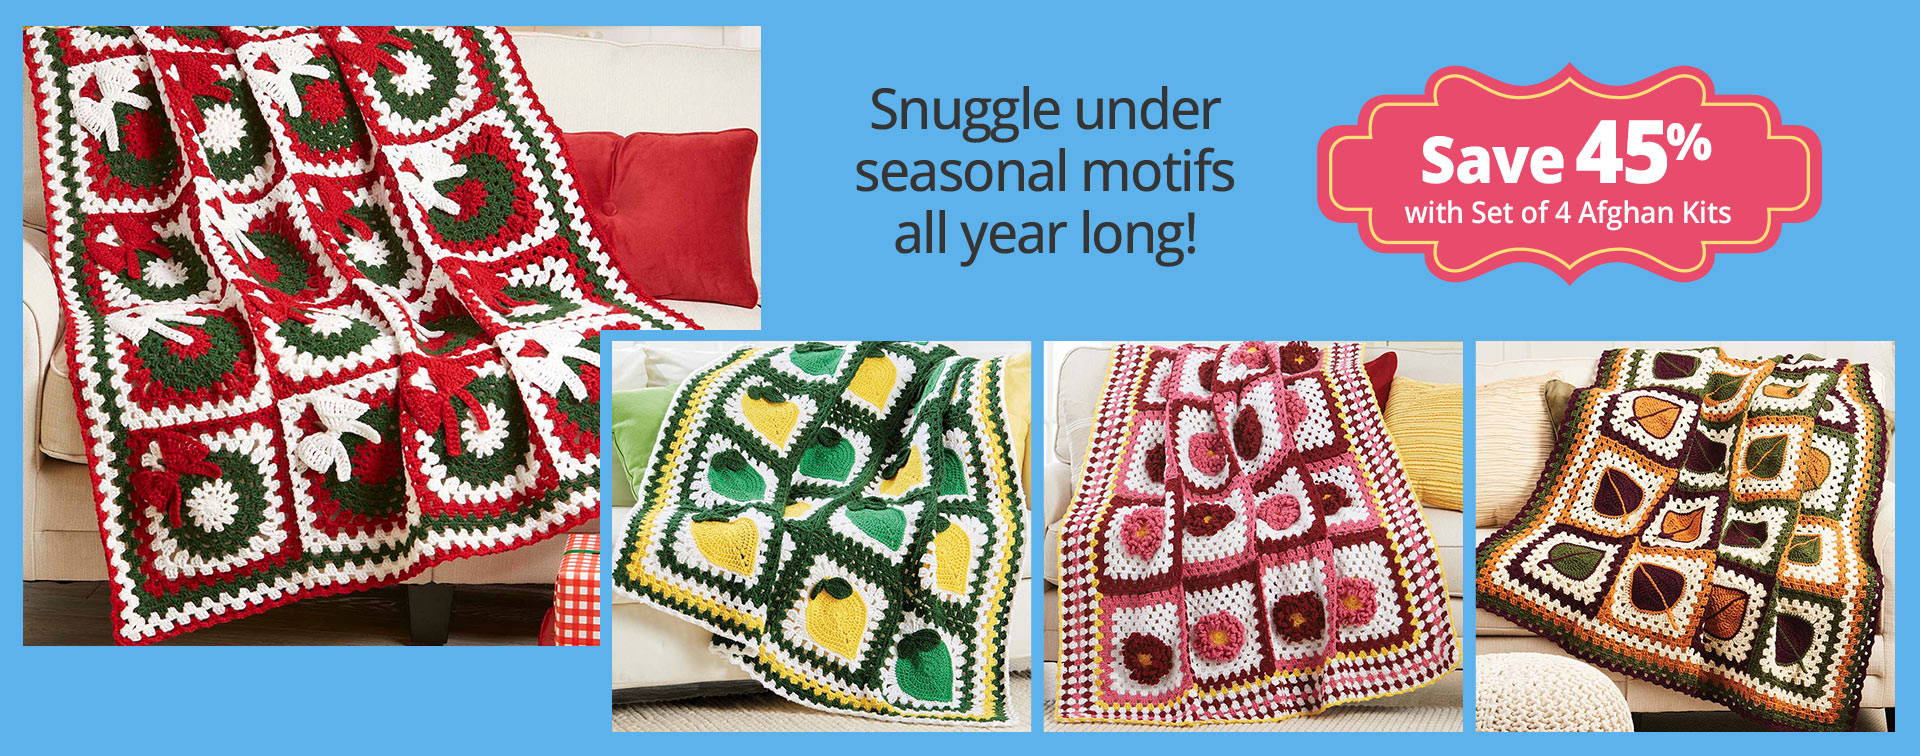 Save 45% with Set of 4 Afghan Kits - Snuggle under seasonal motifs all year long!